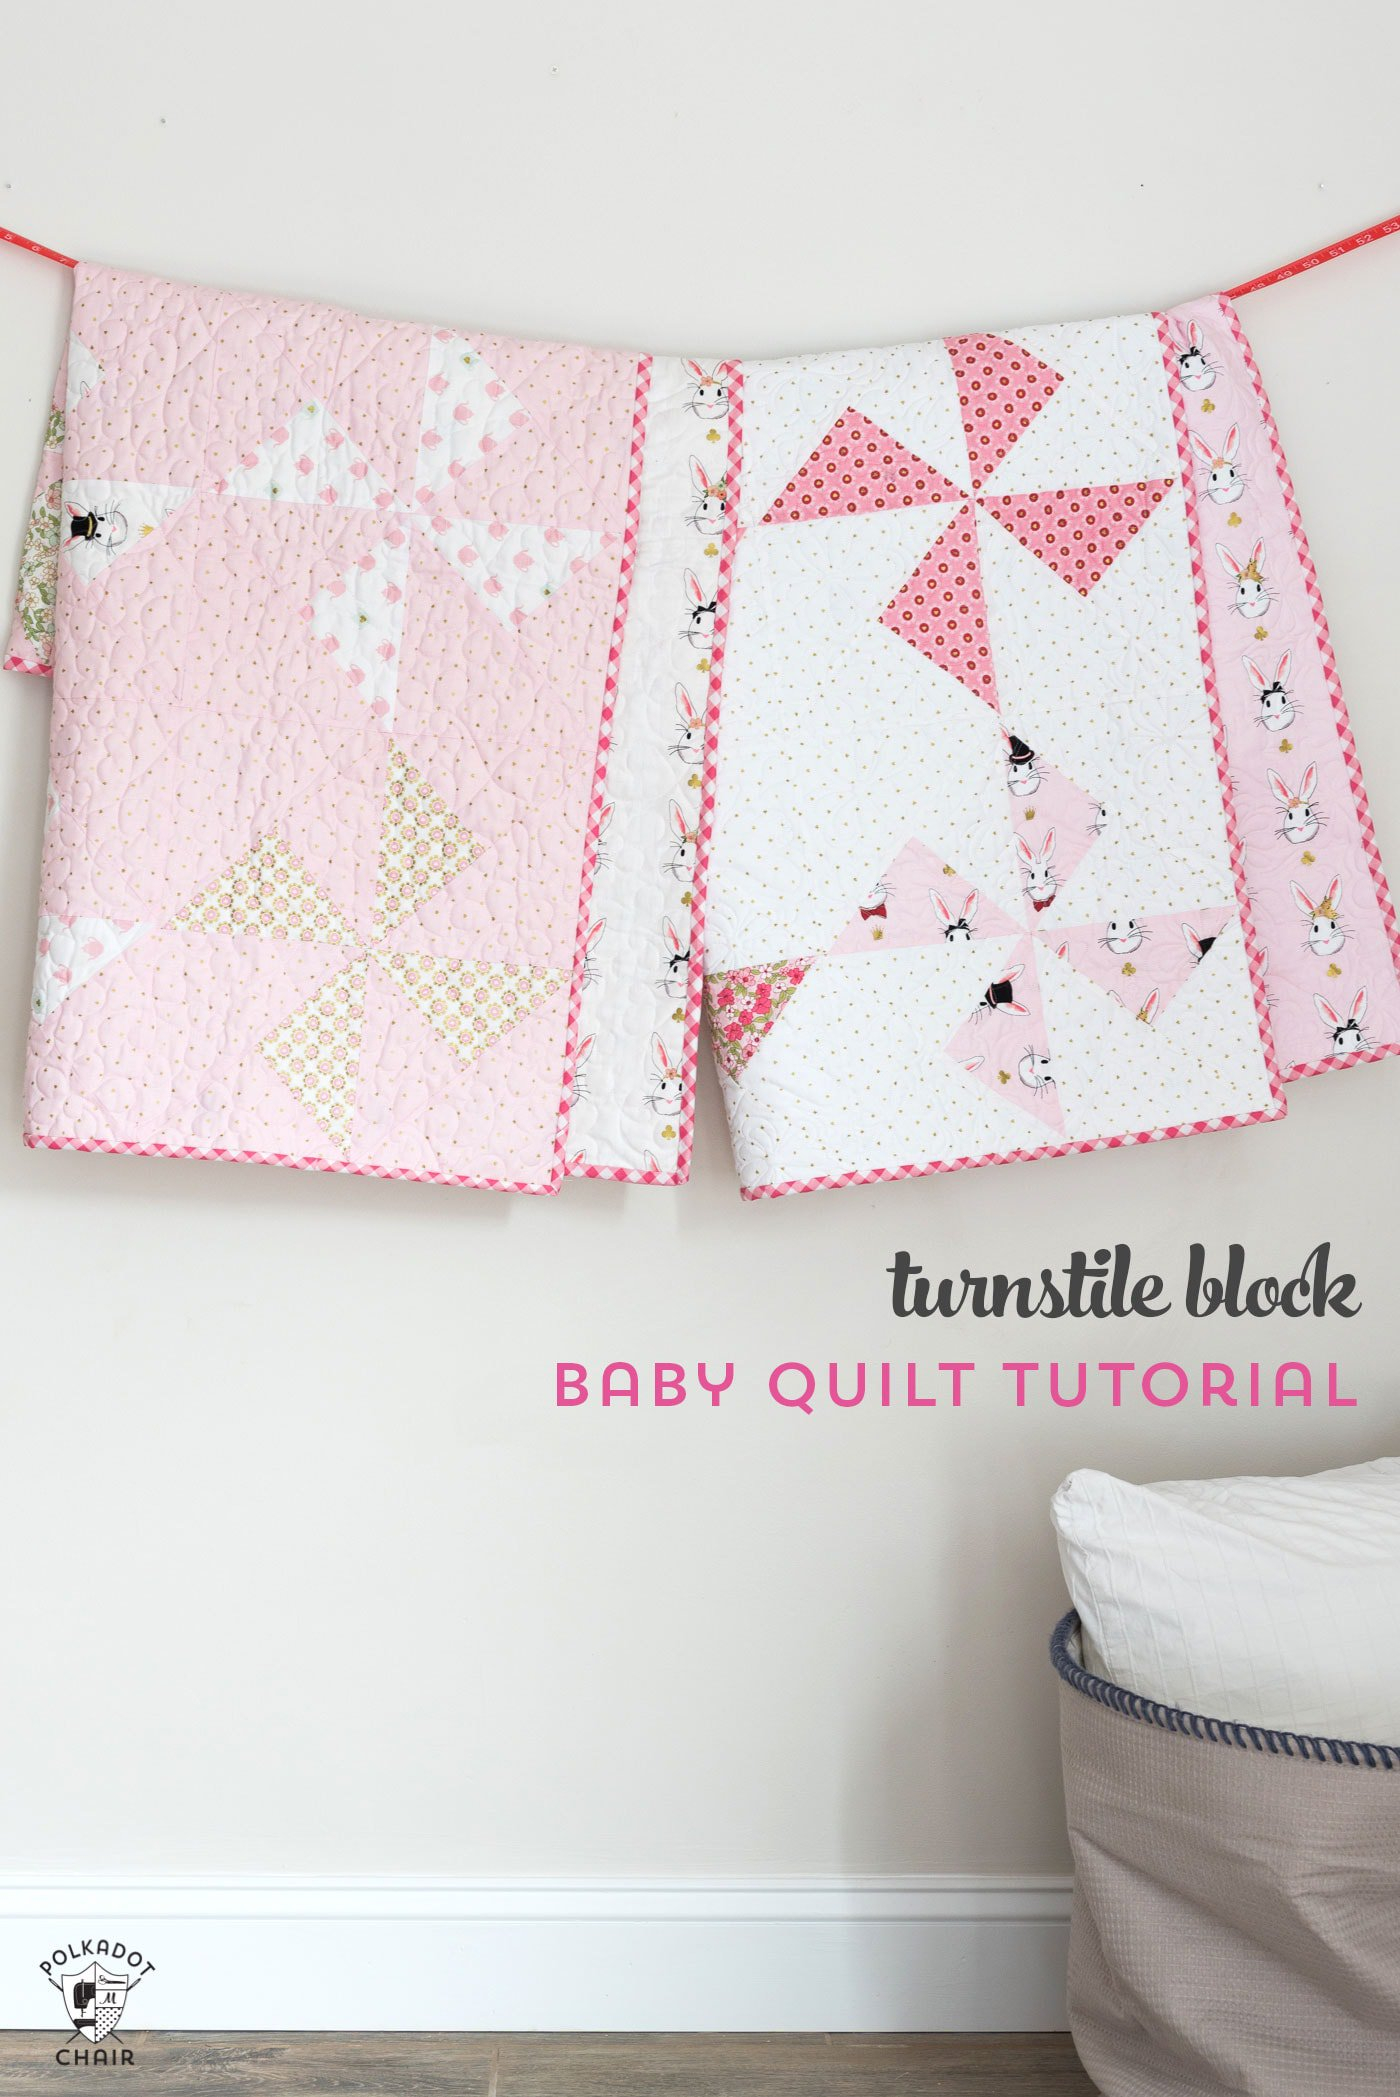 Hand Embroidery Patterns For Baby Quilts 25 Ba Quilt Patterns The Polka Dot Chair